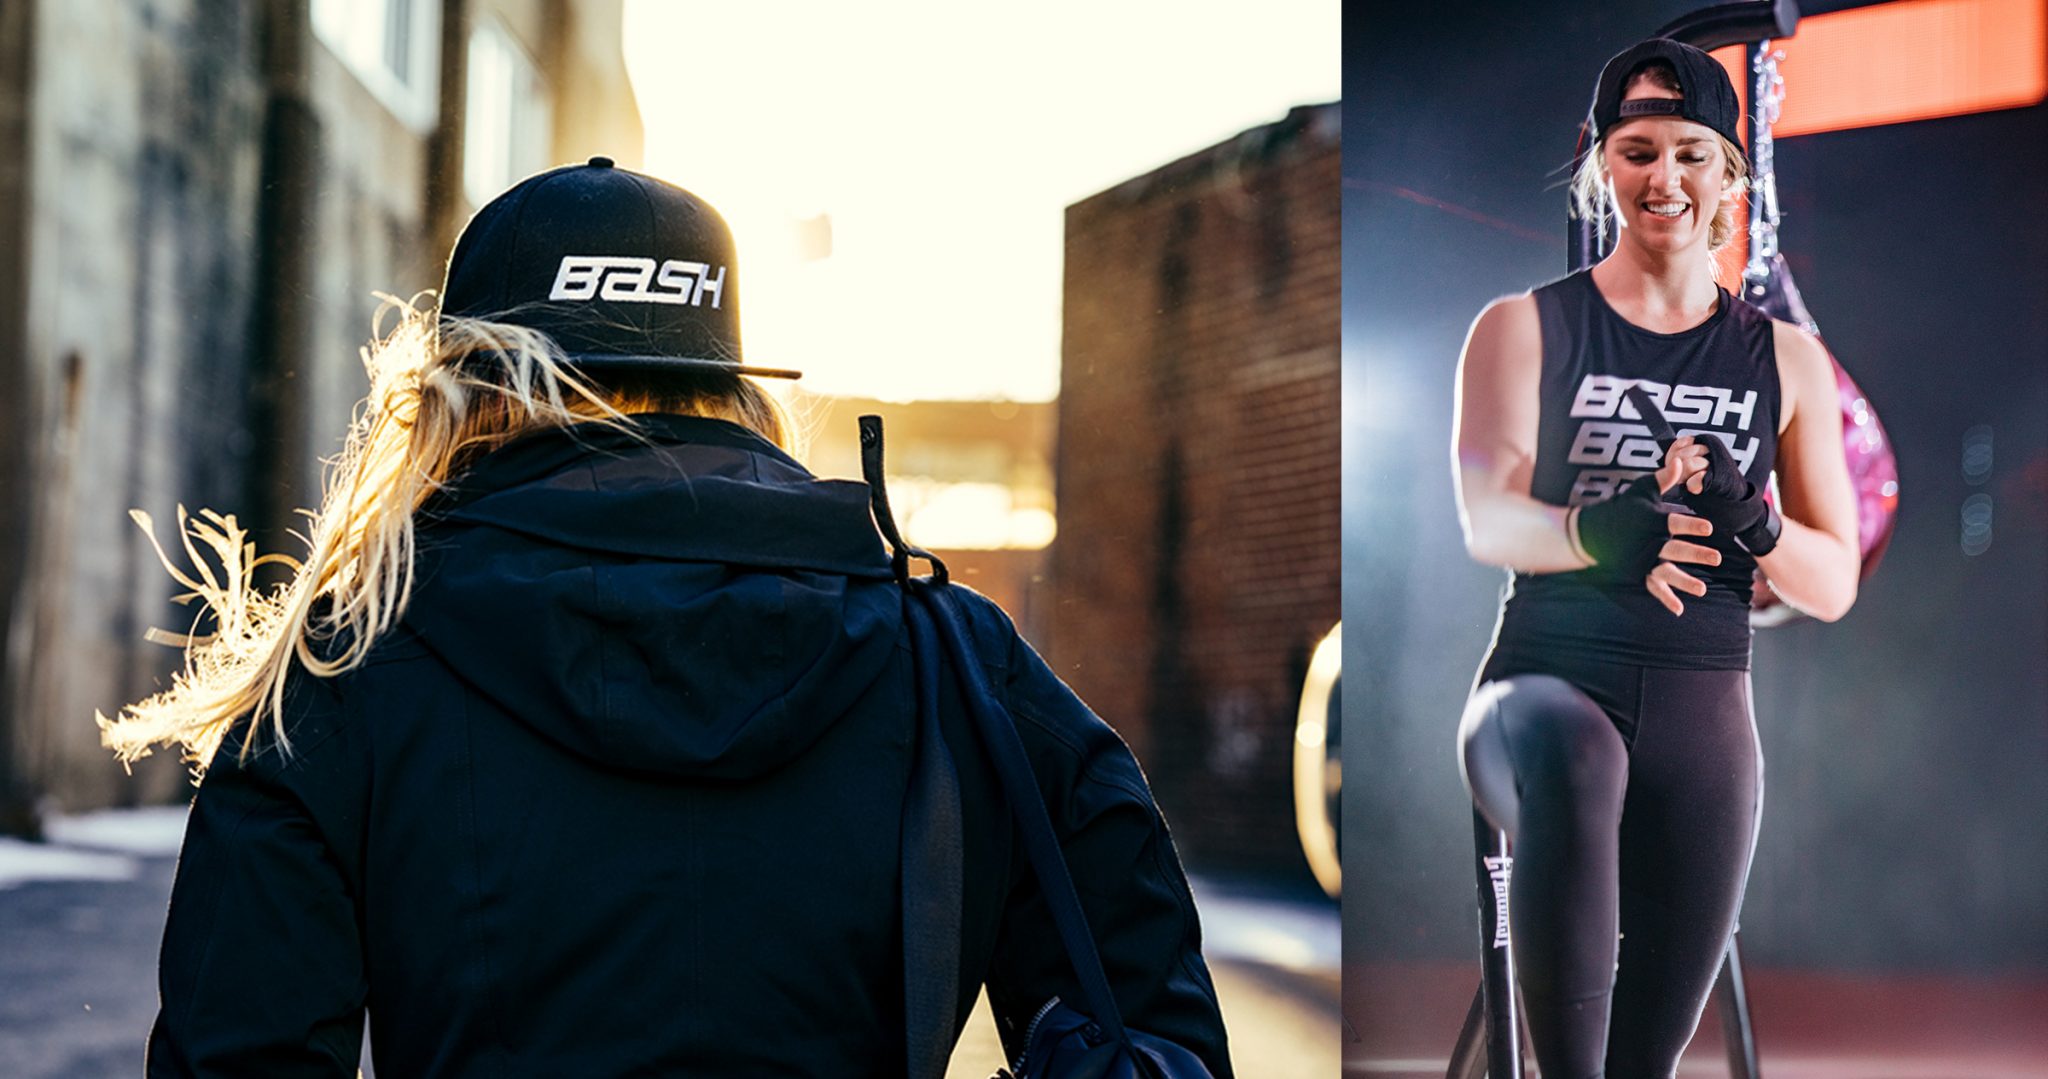 2 images of blonde woman wearing BASH boxing apparel